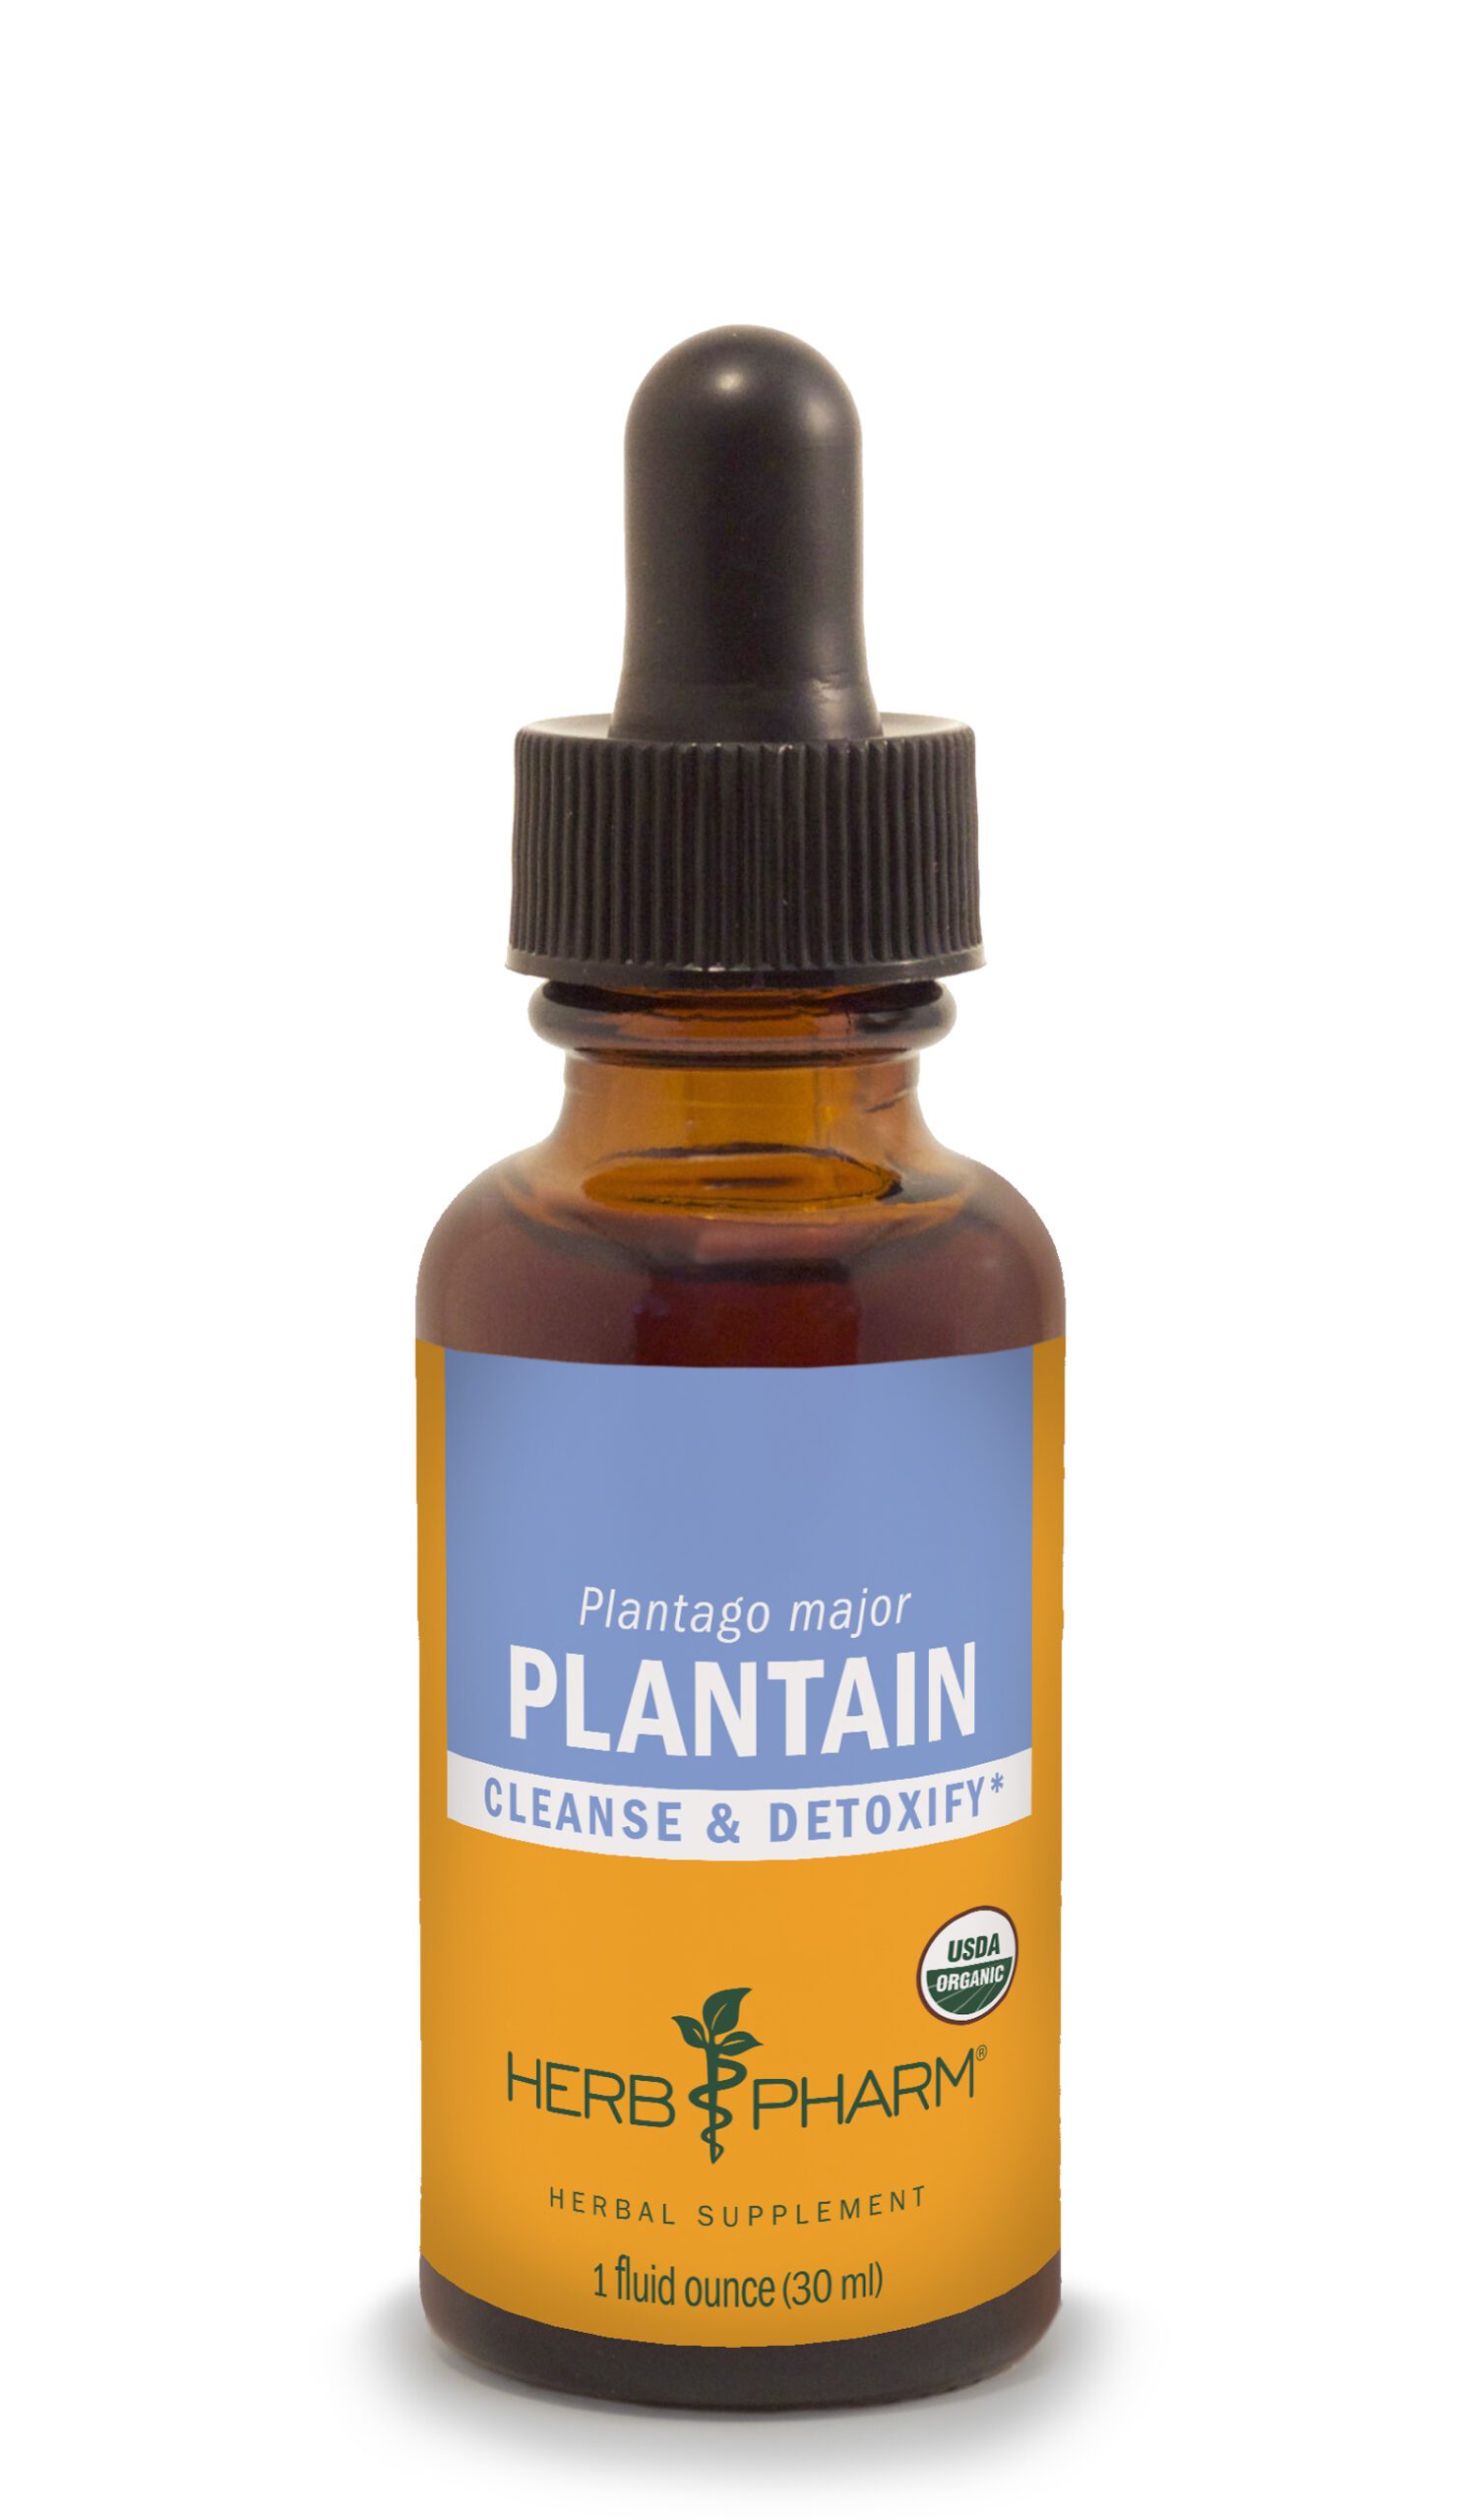 Product Listing Image for Herb Pharm Plantain Tincture 1oz